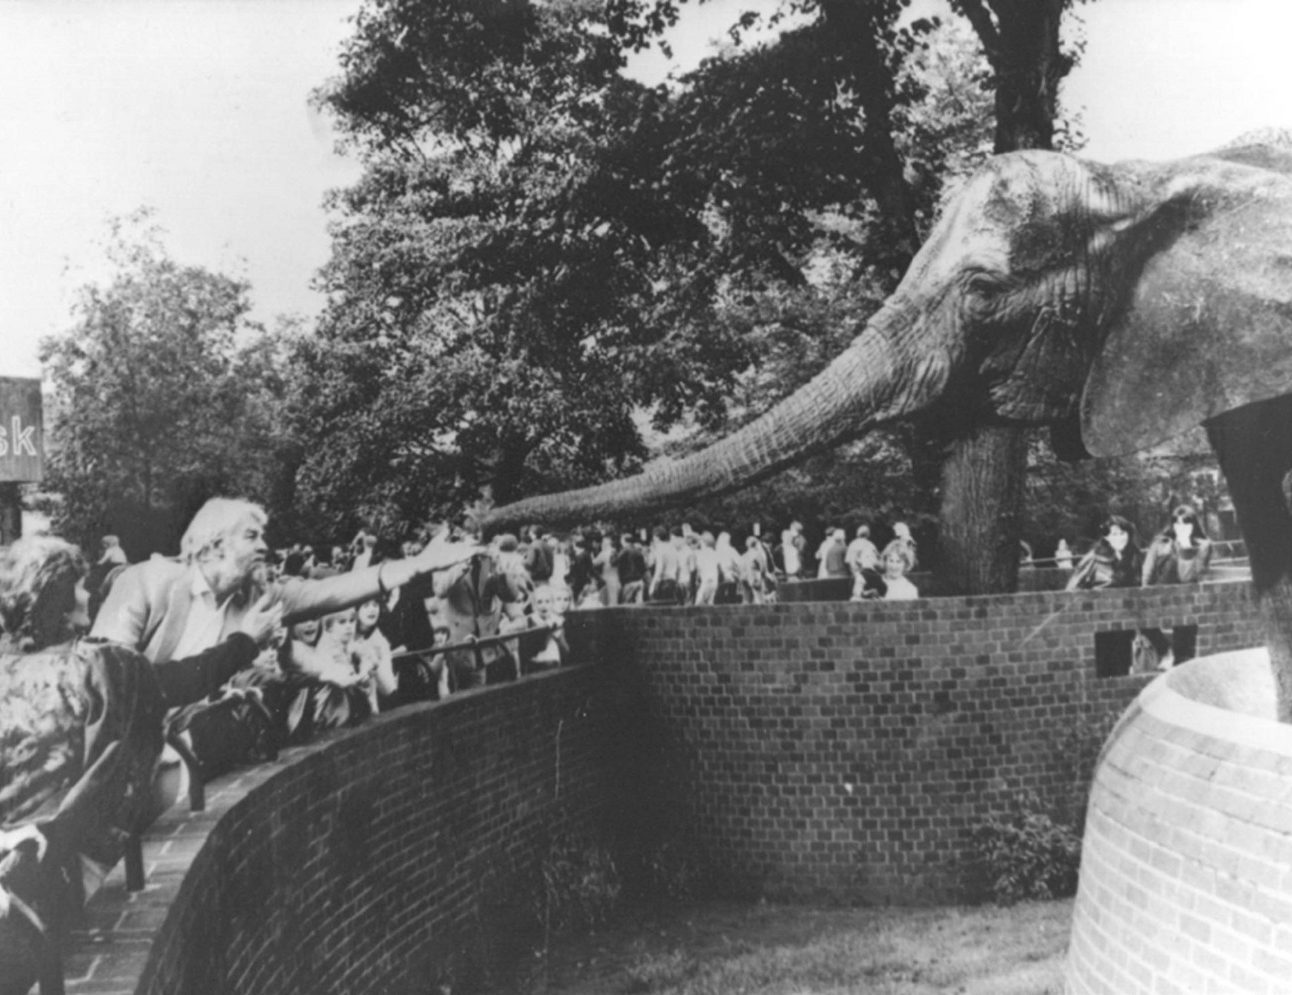 Virginia McKenna and Bill Travers with Pole Pole the elephant reaching out her trunk at London Zoo